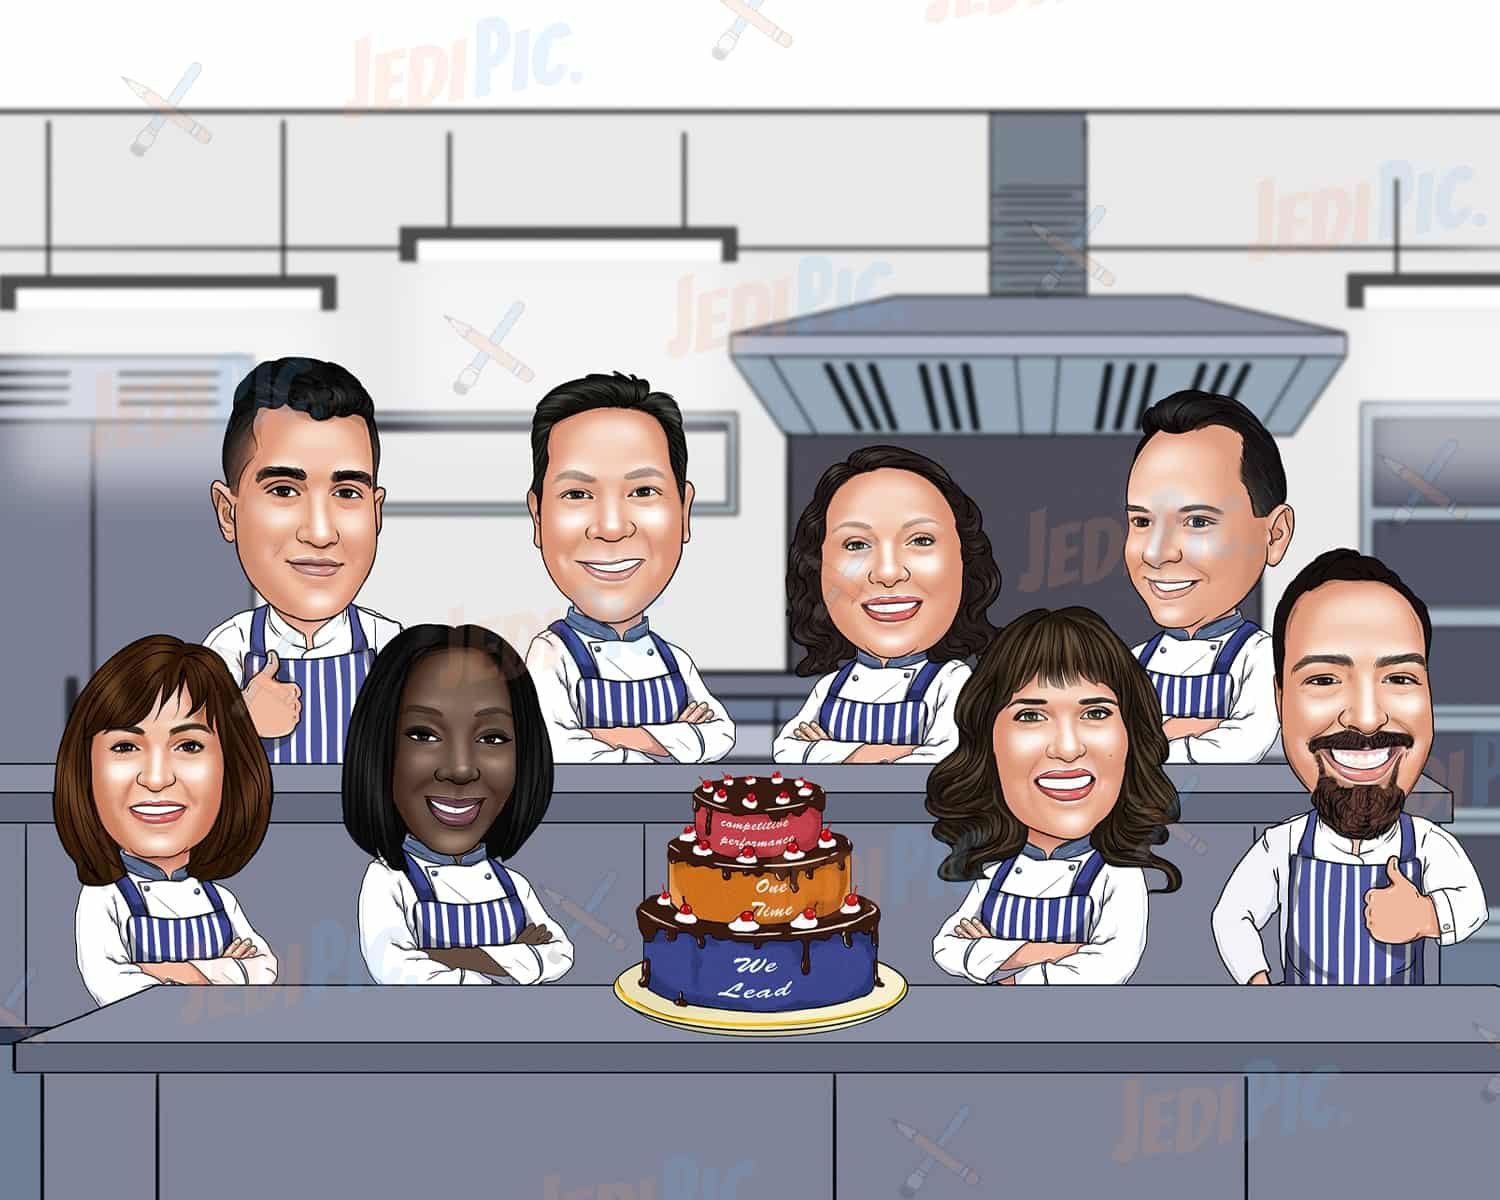 Chef Group Caricature in Colored Style with Custom Background